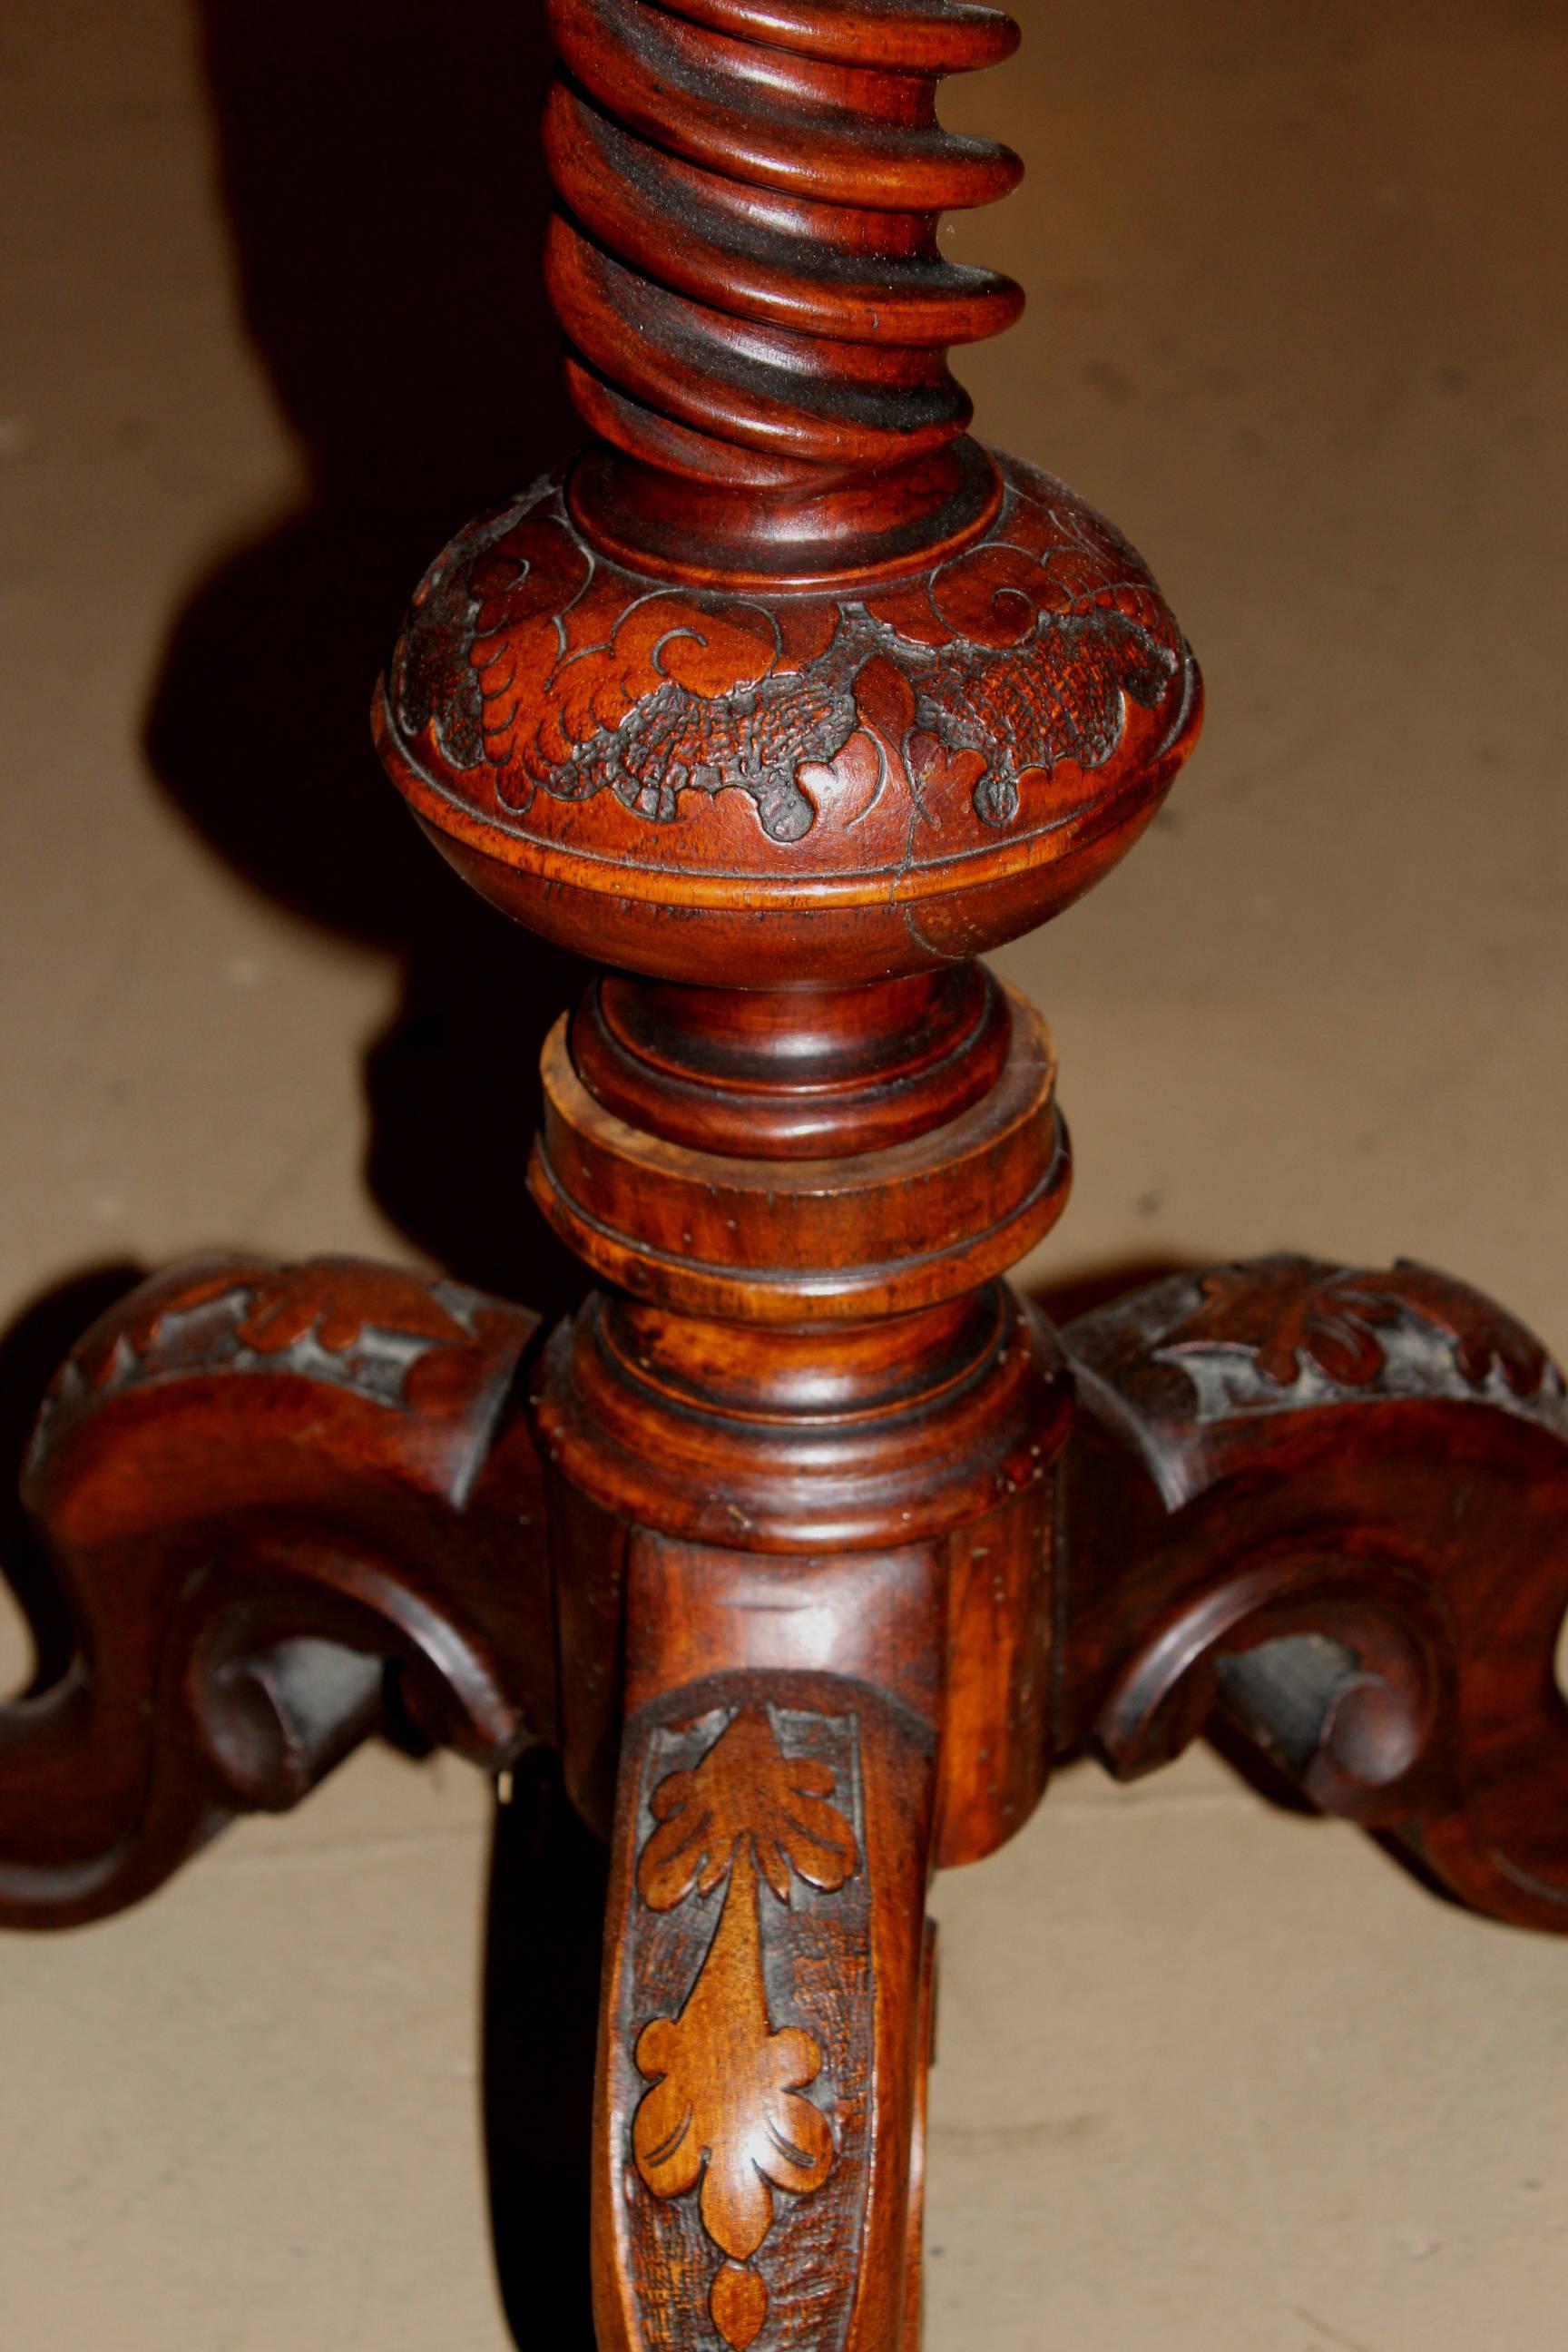 Burl Carved and Inlaid Candle Stand with Marquetry, circa 1860